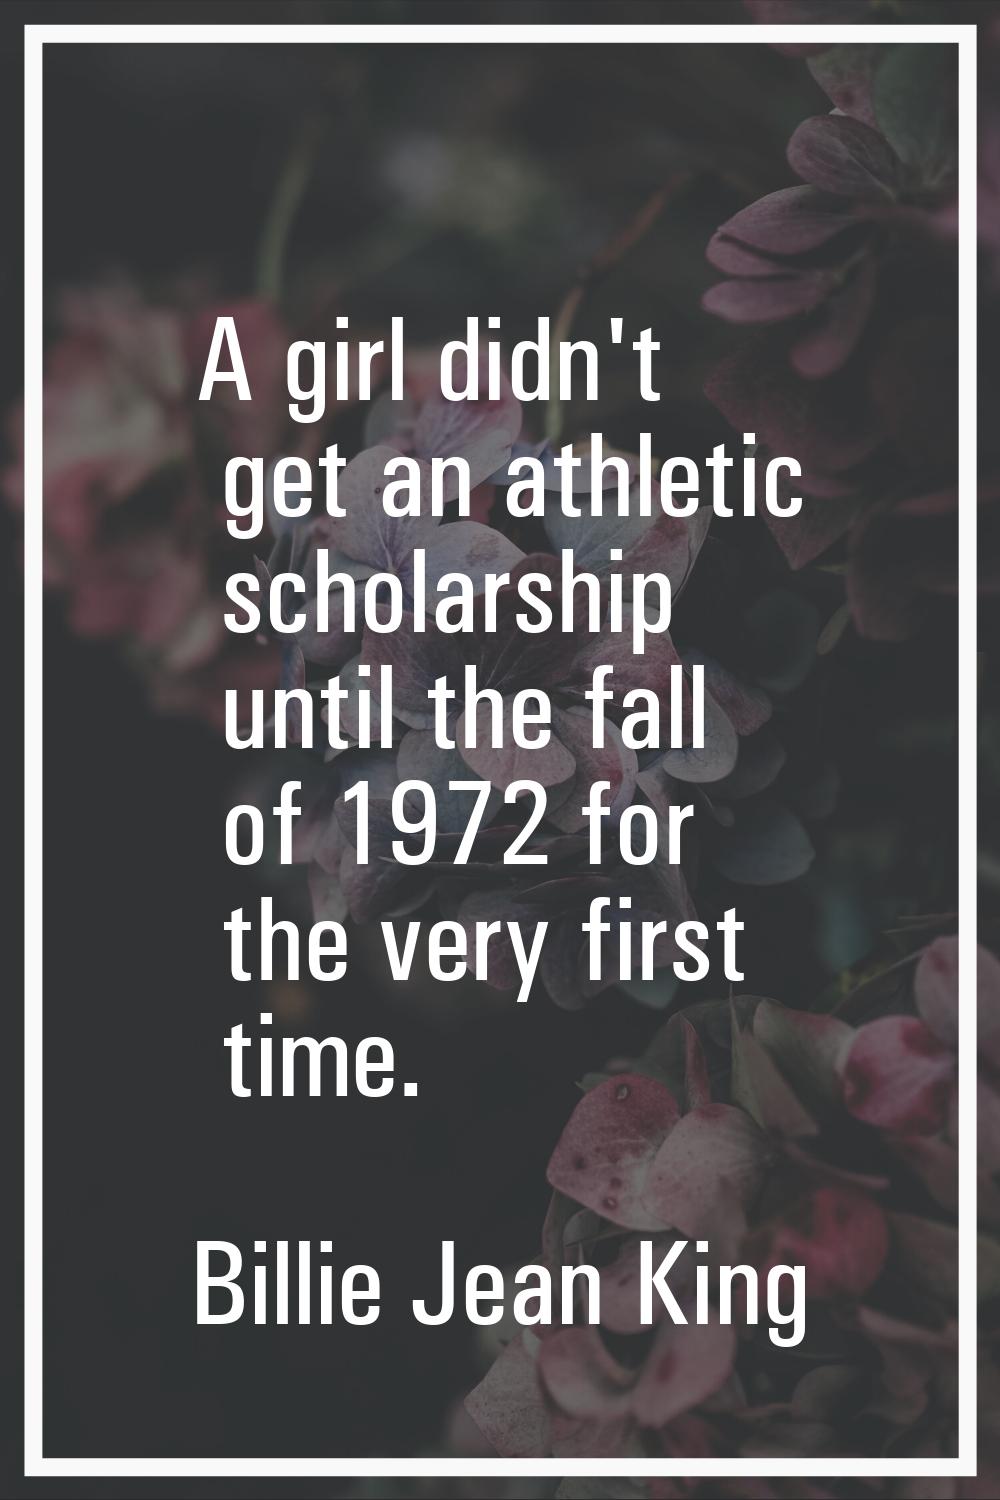 A girl didn't get an athletic scholarship until the fall of 1972 for the very first time.